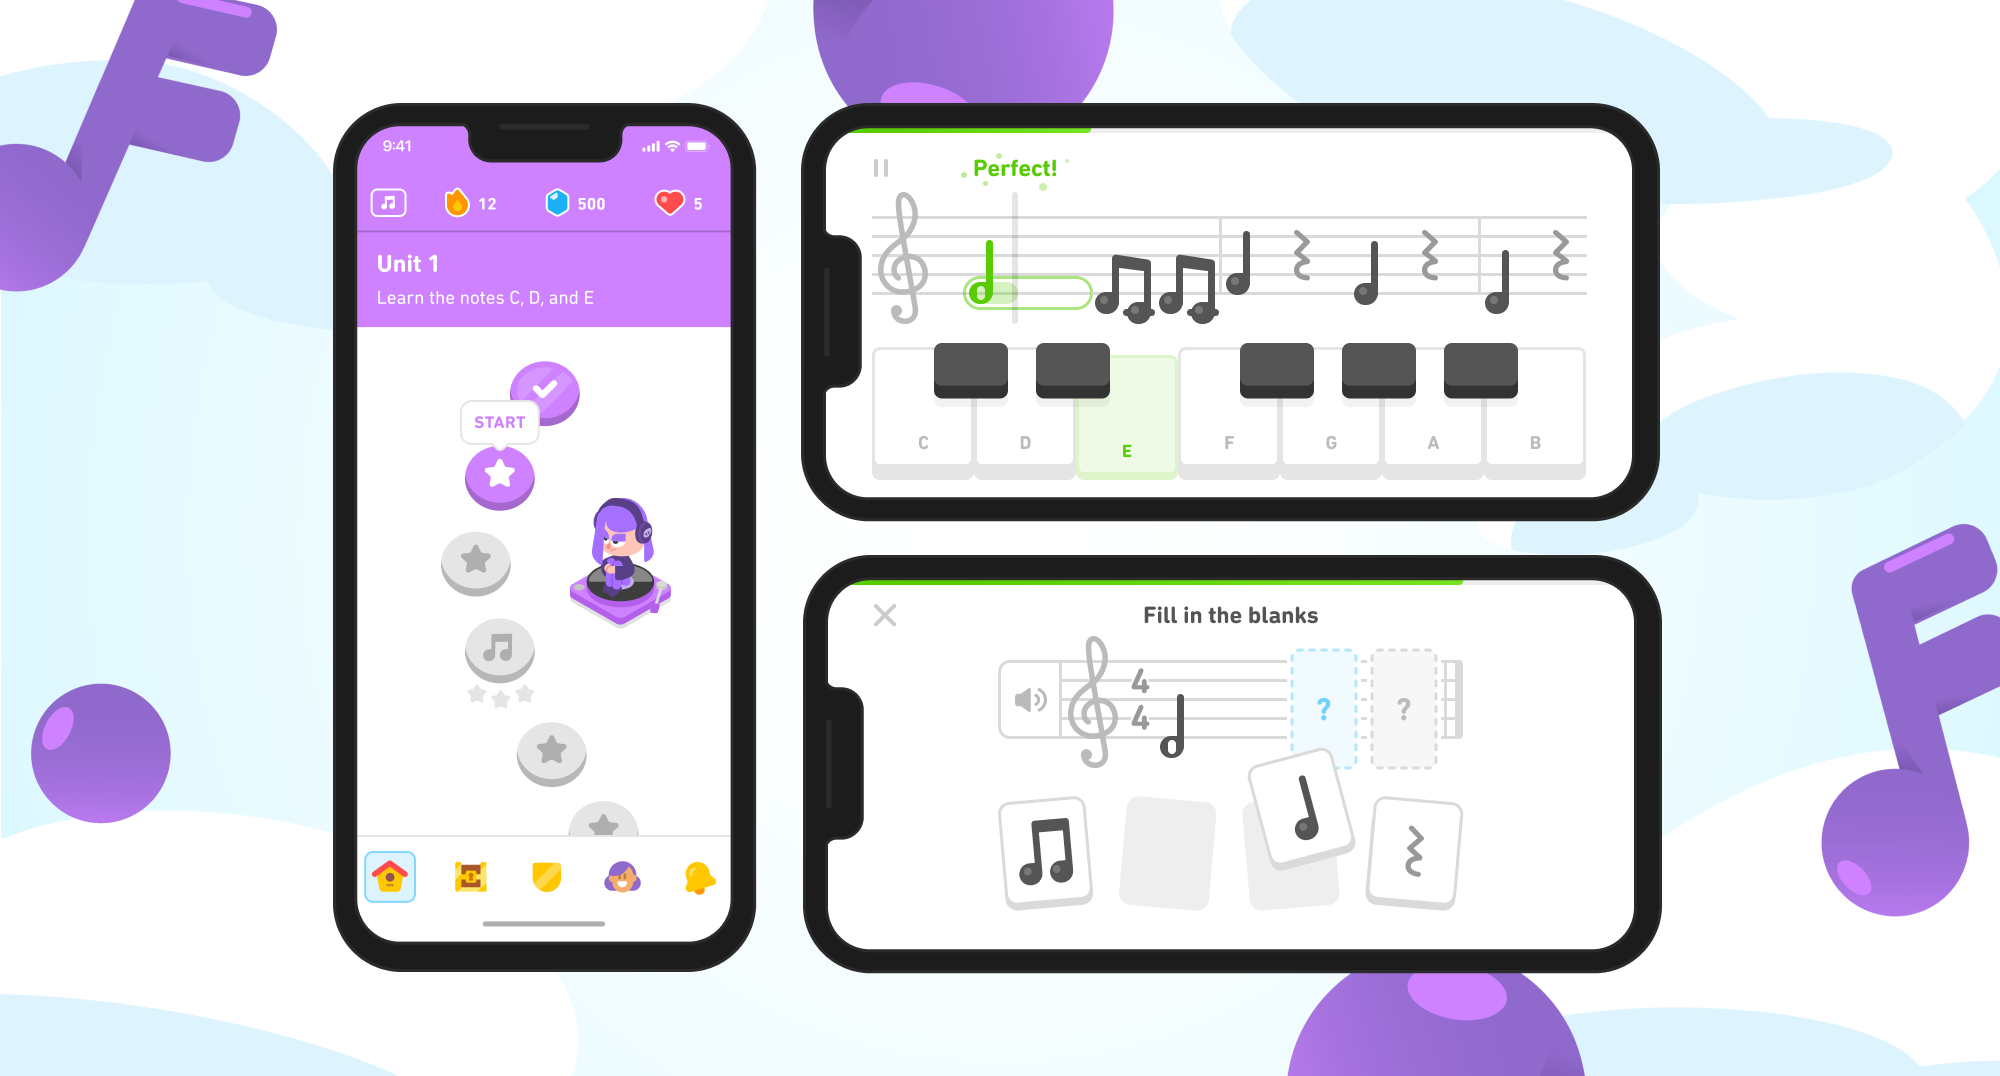 Three screens showing the new Music course. The first iPhone screen shows a Duolingo path labeled "Unit 1: Learn the notes C, D, and E" and there are two nodes completed. The second two screens are exercises from the Music course: the phone is oriented horizontally for both. The first exercise shows someone playing notes on a keyboard that correspond to notes on a staff, and the second is a "fill in the blank exercise" where a learner drags the appropriate note or rest note onto the staff.